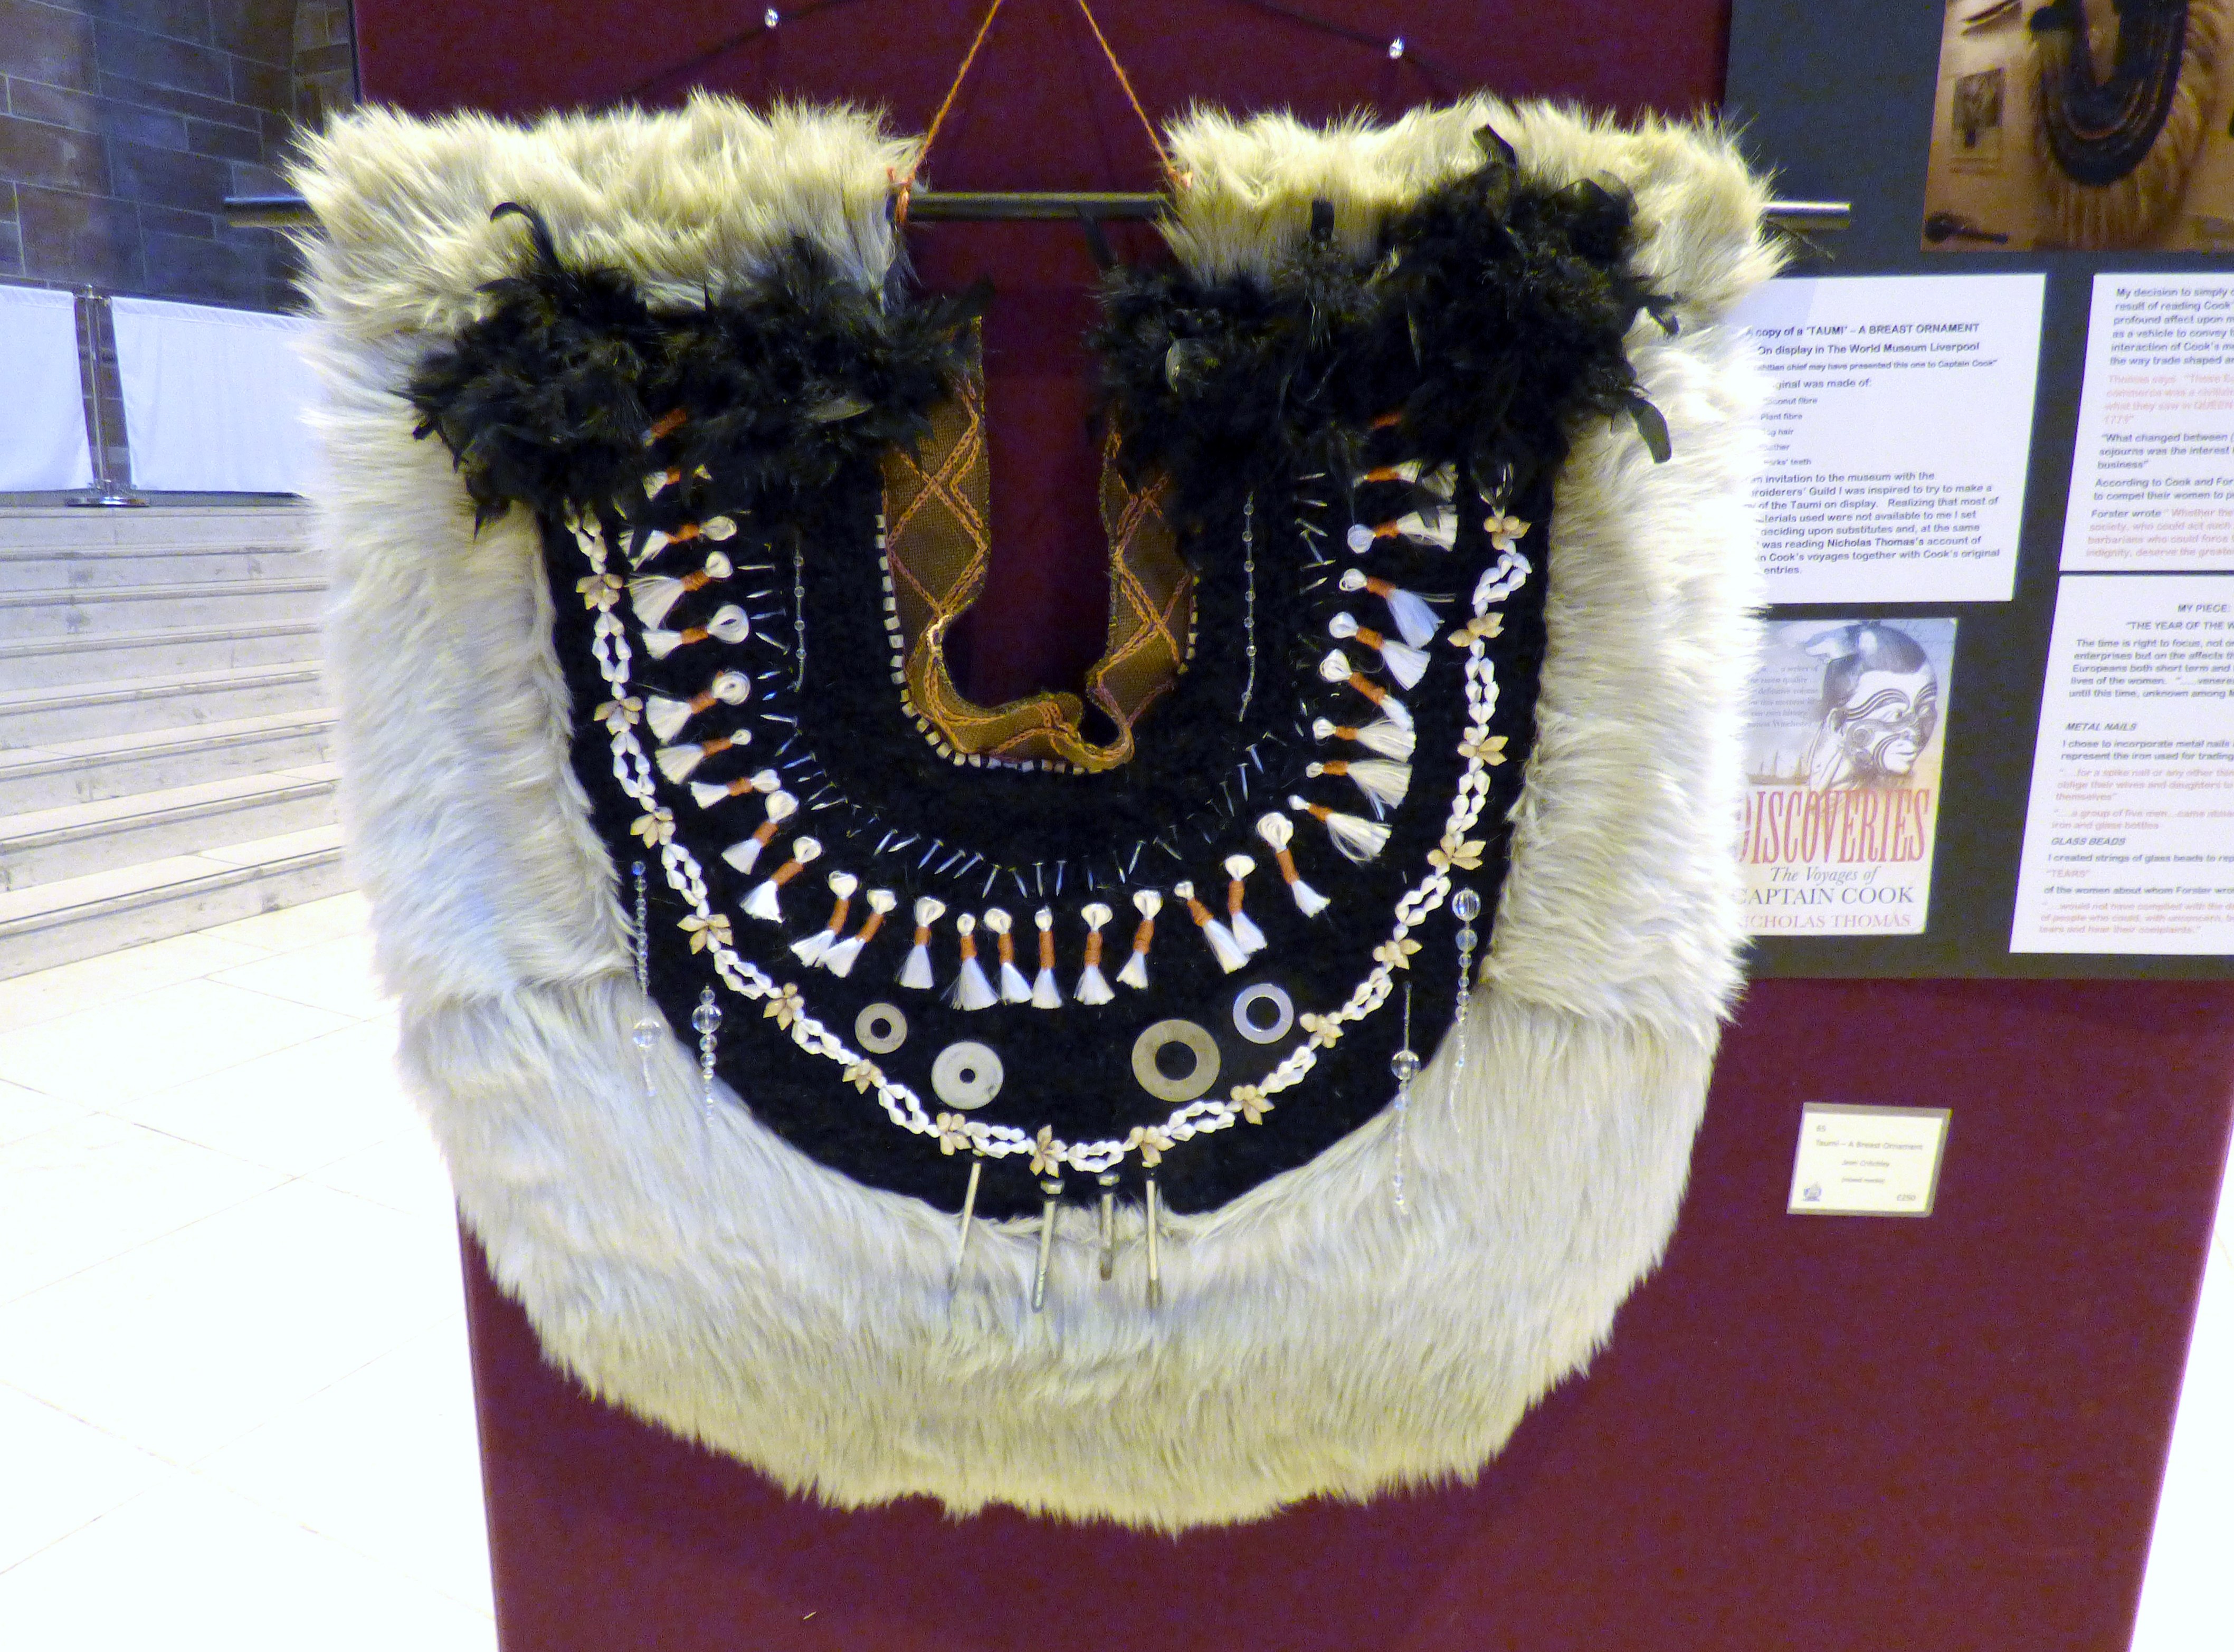 TAUMI - A BREAST ORNAMENT by Jean Critchley, mixed media,  Endeavour exhibition, Liverpool Cathedral, Sept 2018